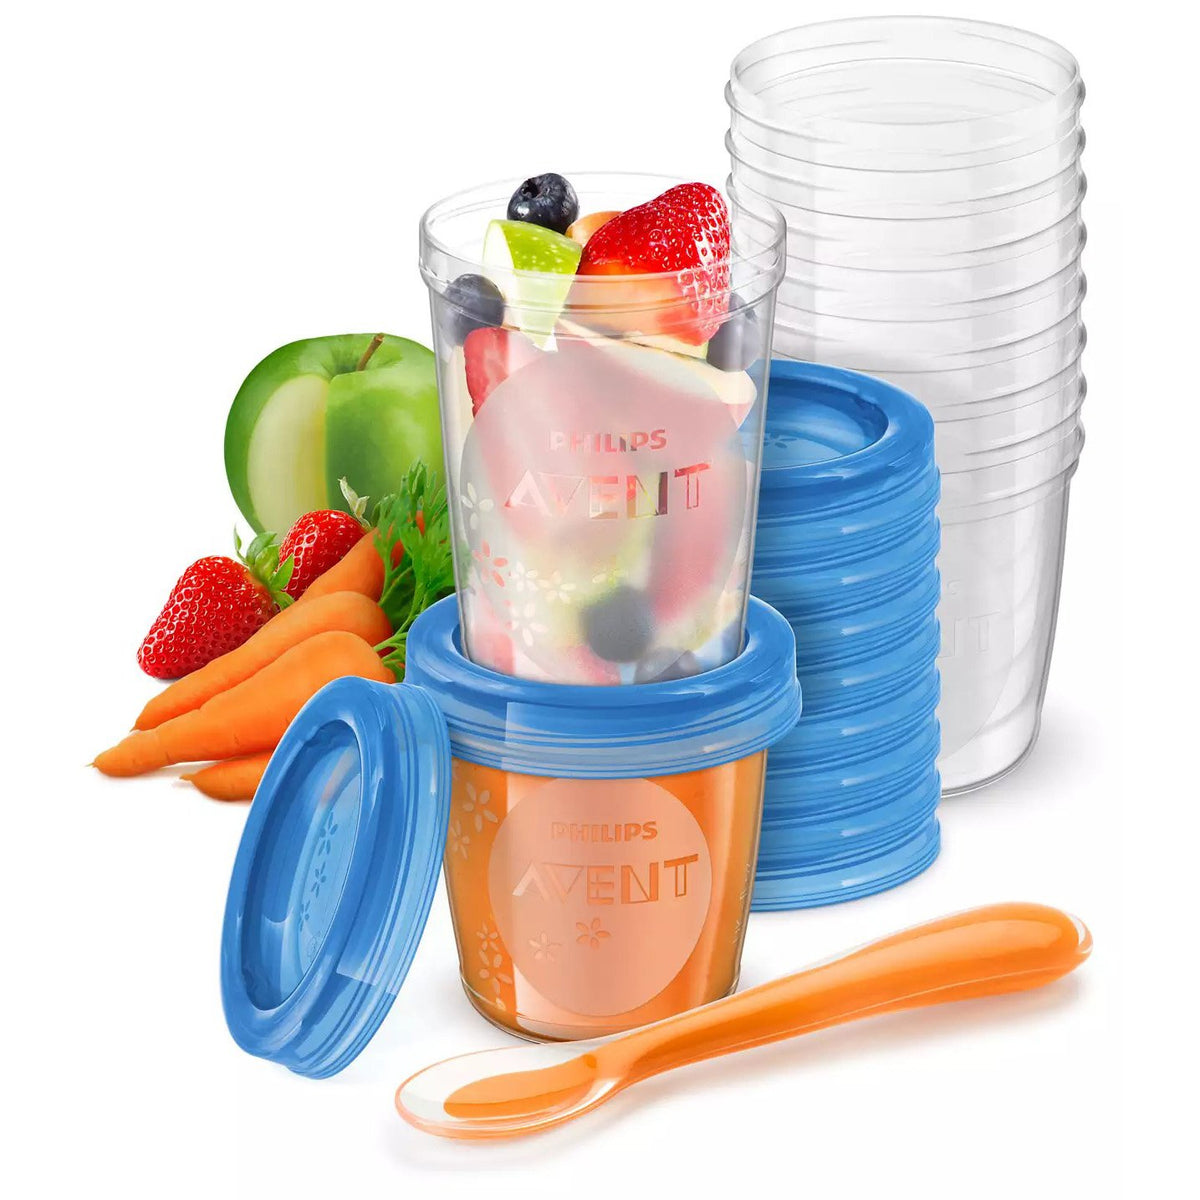 philips-avent-food-storage-cup (1)